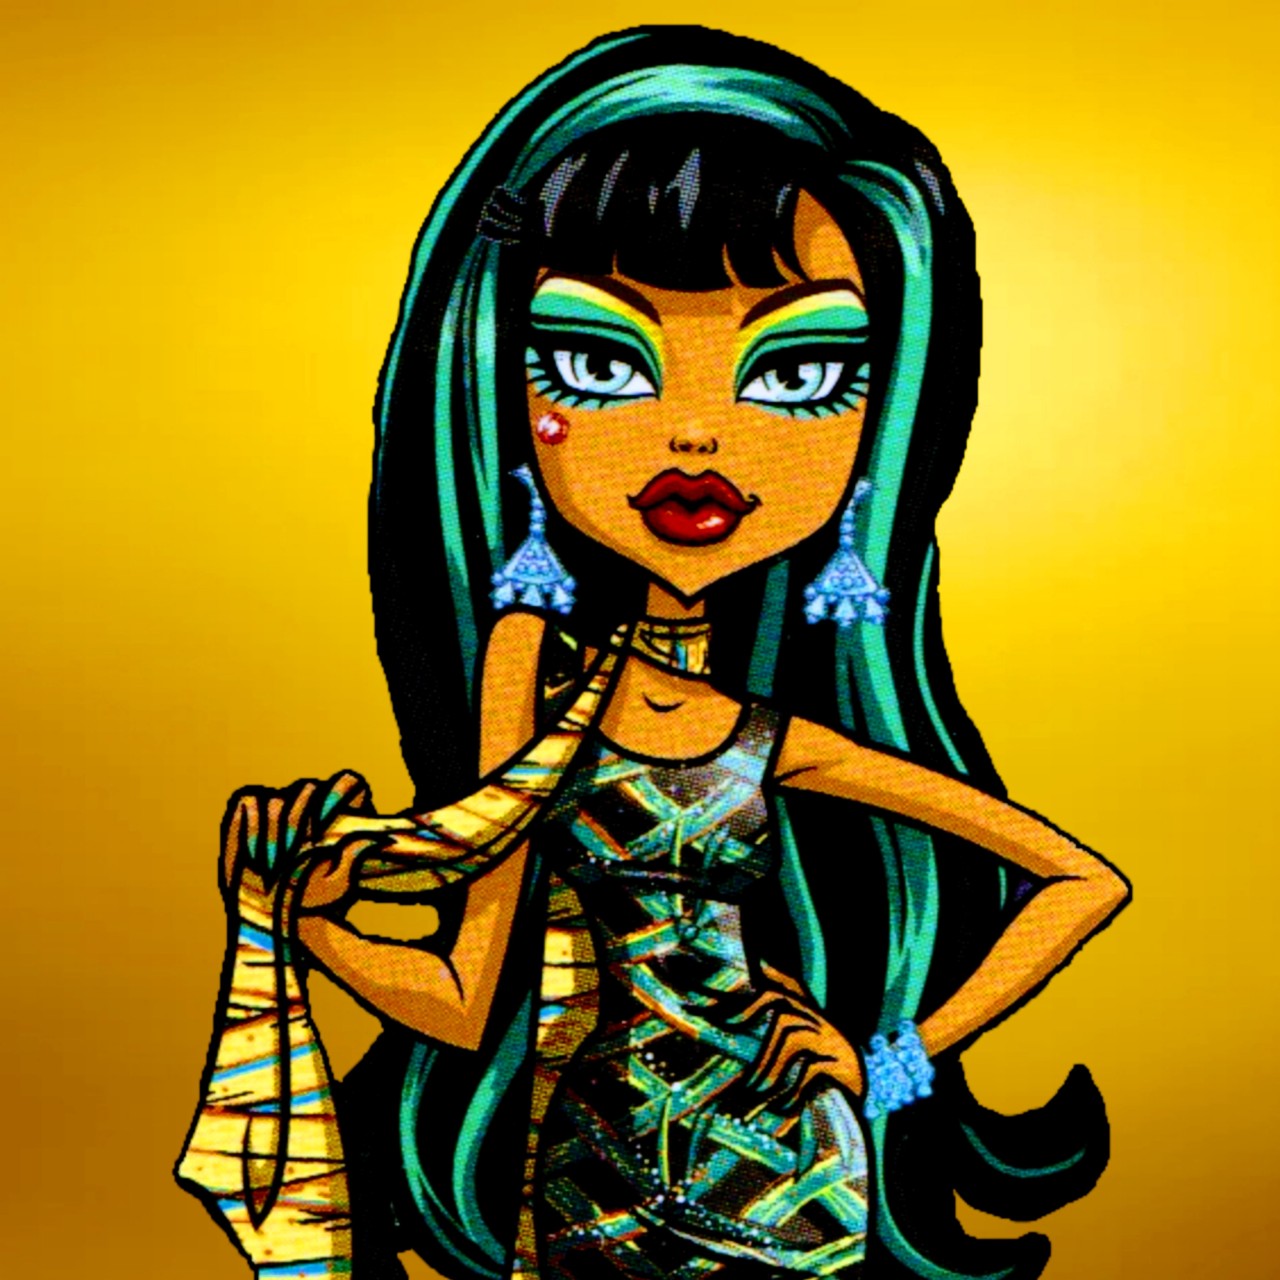 Monster High Icons (Close-up)Like and/or reblog if you save/use #monster high #scaris: city of frights  #cleo de nile #lagoona blue#sparkly#glitter#close-up#icons#square icons #icons by me